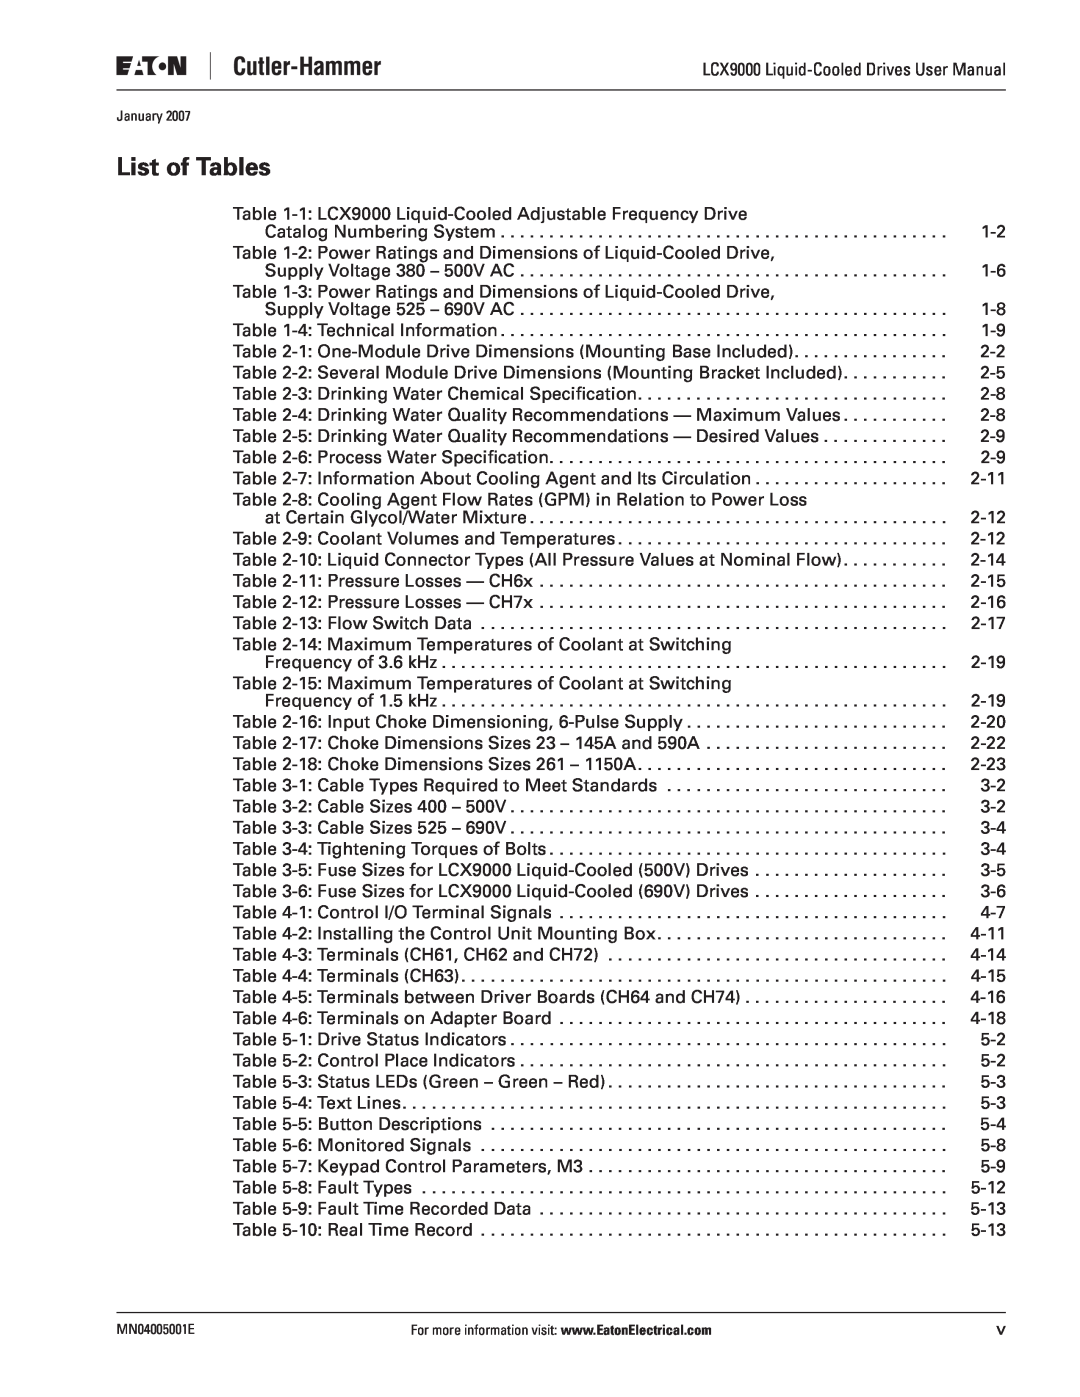 J. T. Eaton LCX9000 user manual List of Tables 